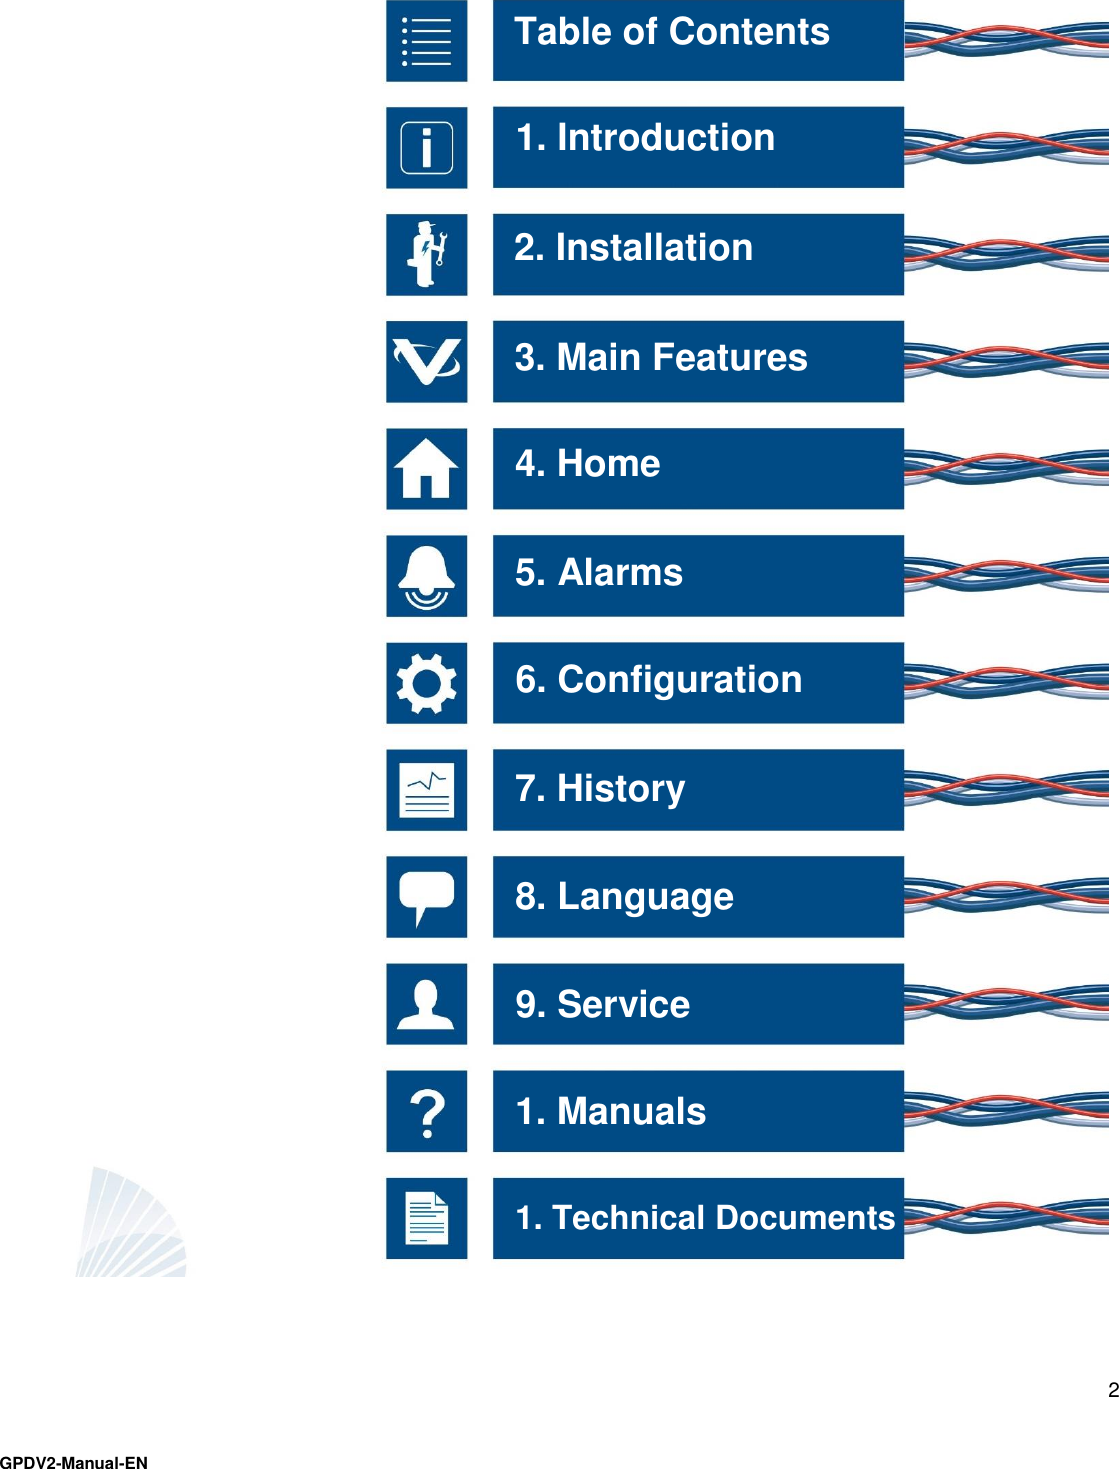    2    3. Main Features 4. Home 5. Alarms 6. Configuration 7. History 8. Language 2. Installation 1. Introduction Table of Contents 9. Service 1. Manuals 1. Technical Documents GPDV2-Manual-EN 